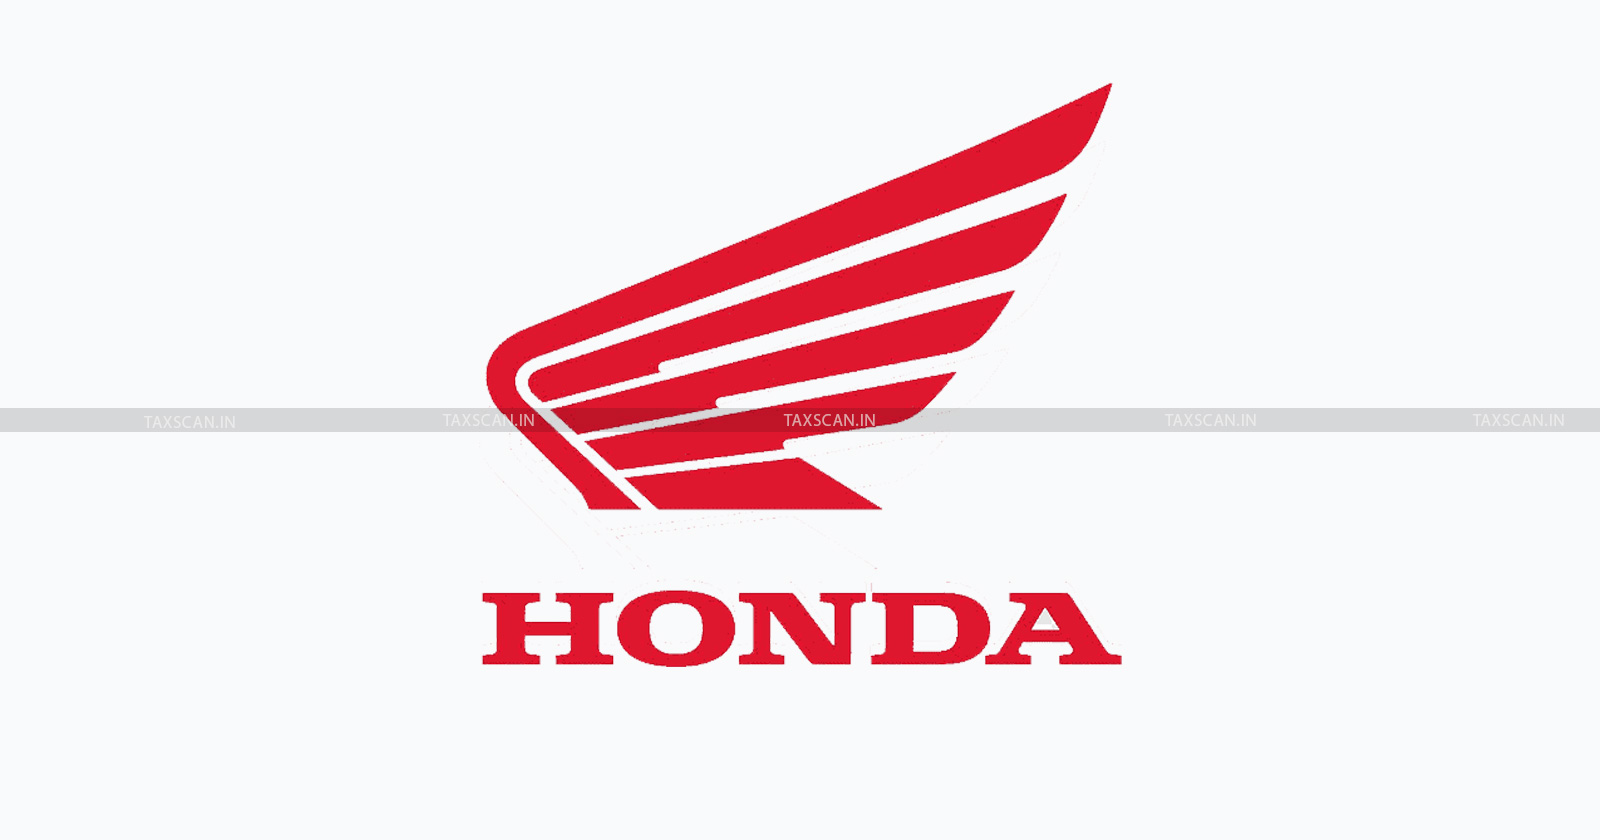 Export Commission Payment - Honda - Honda Subsidy - Export commission pricing - Honda Motor - taxscan